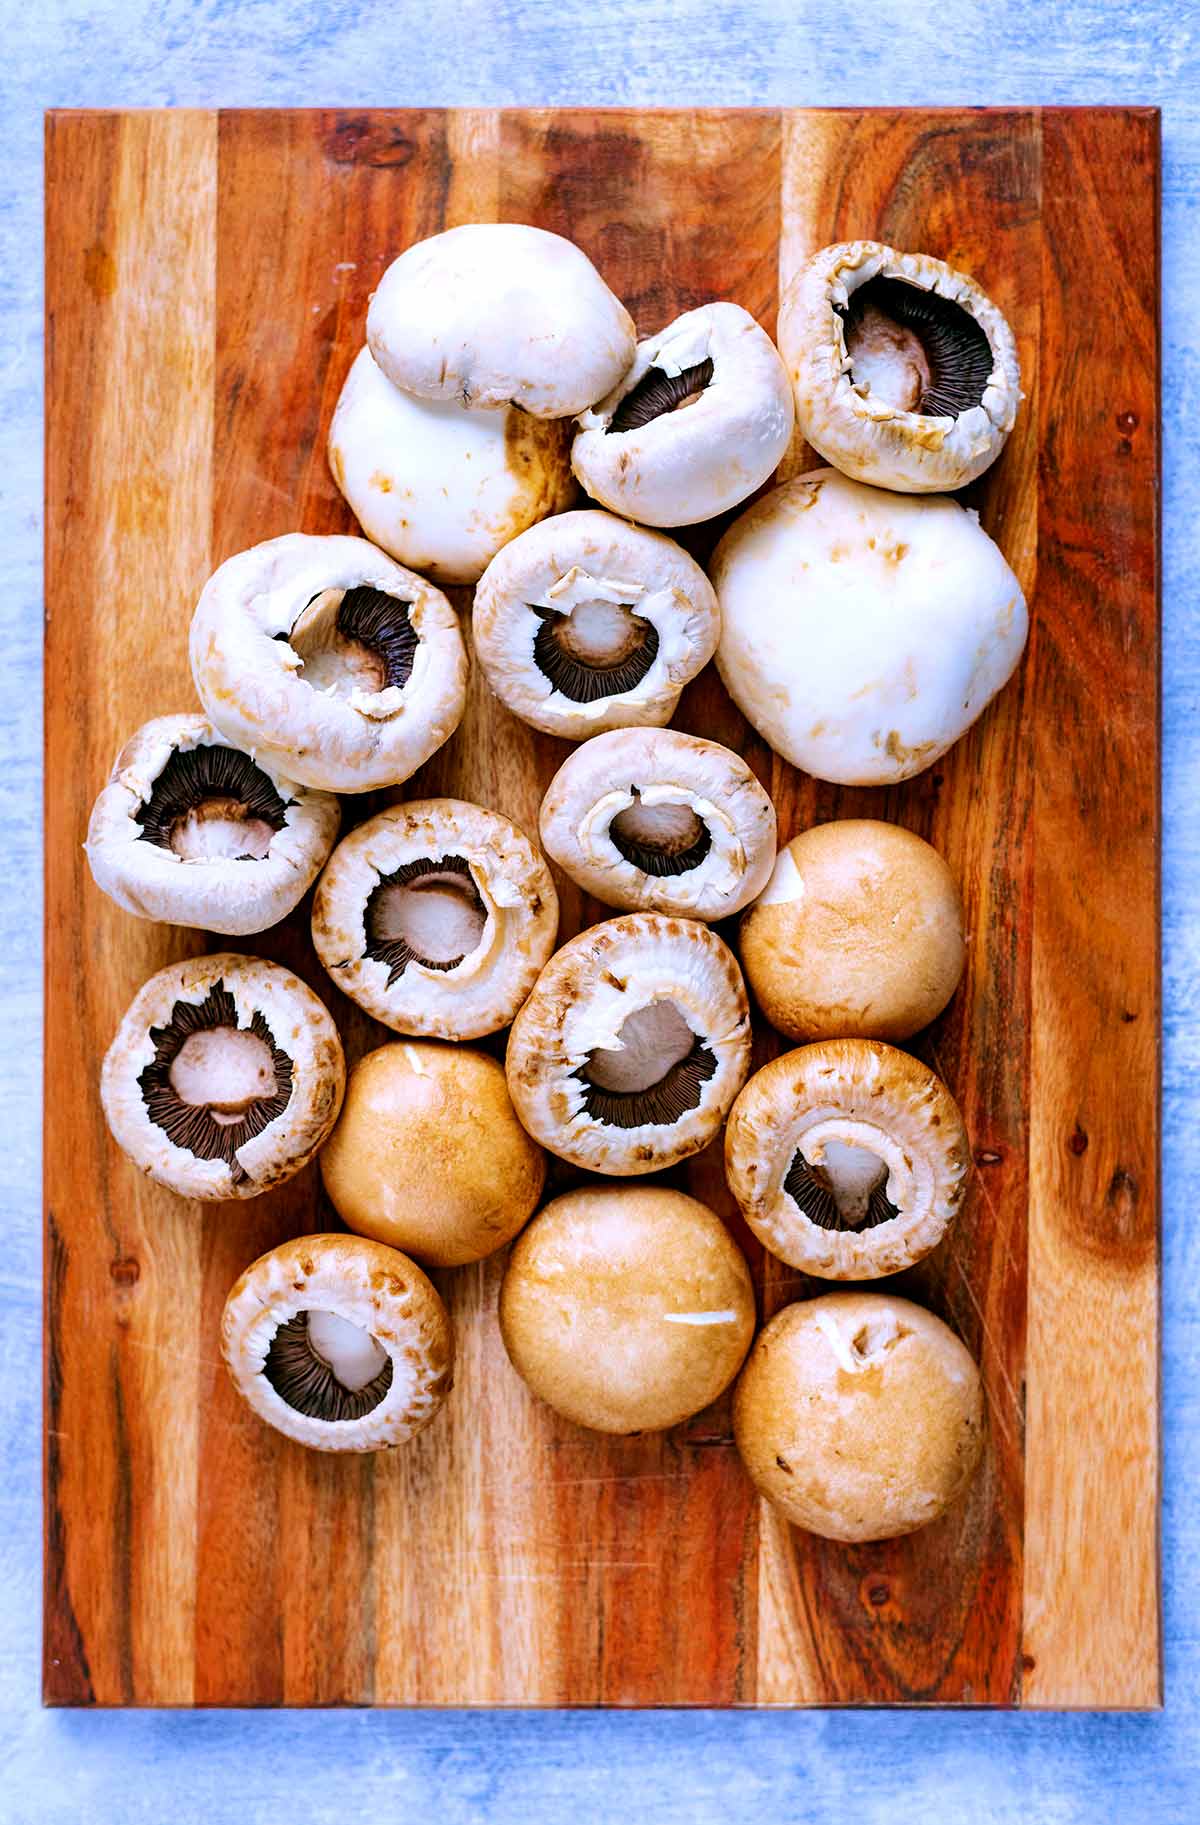 A wooden chopping board with a selection of mushrooms on it.